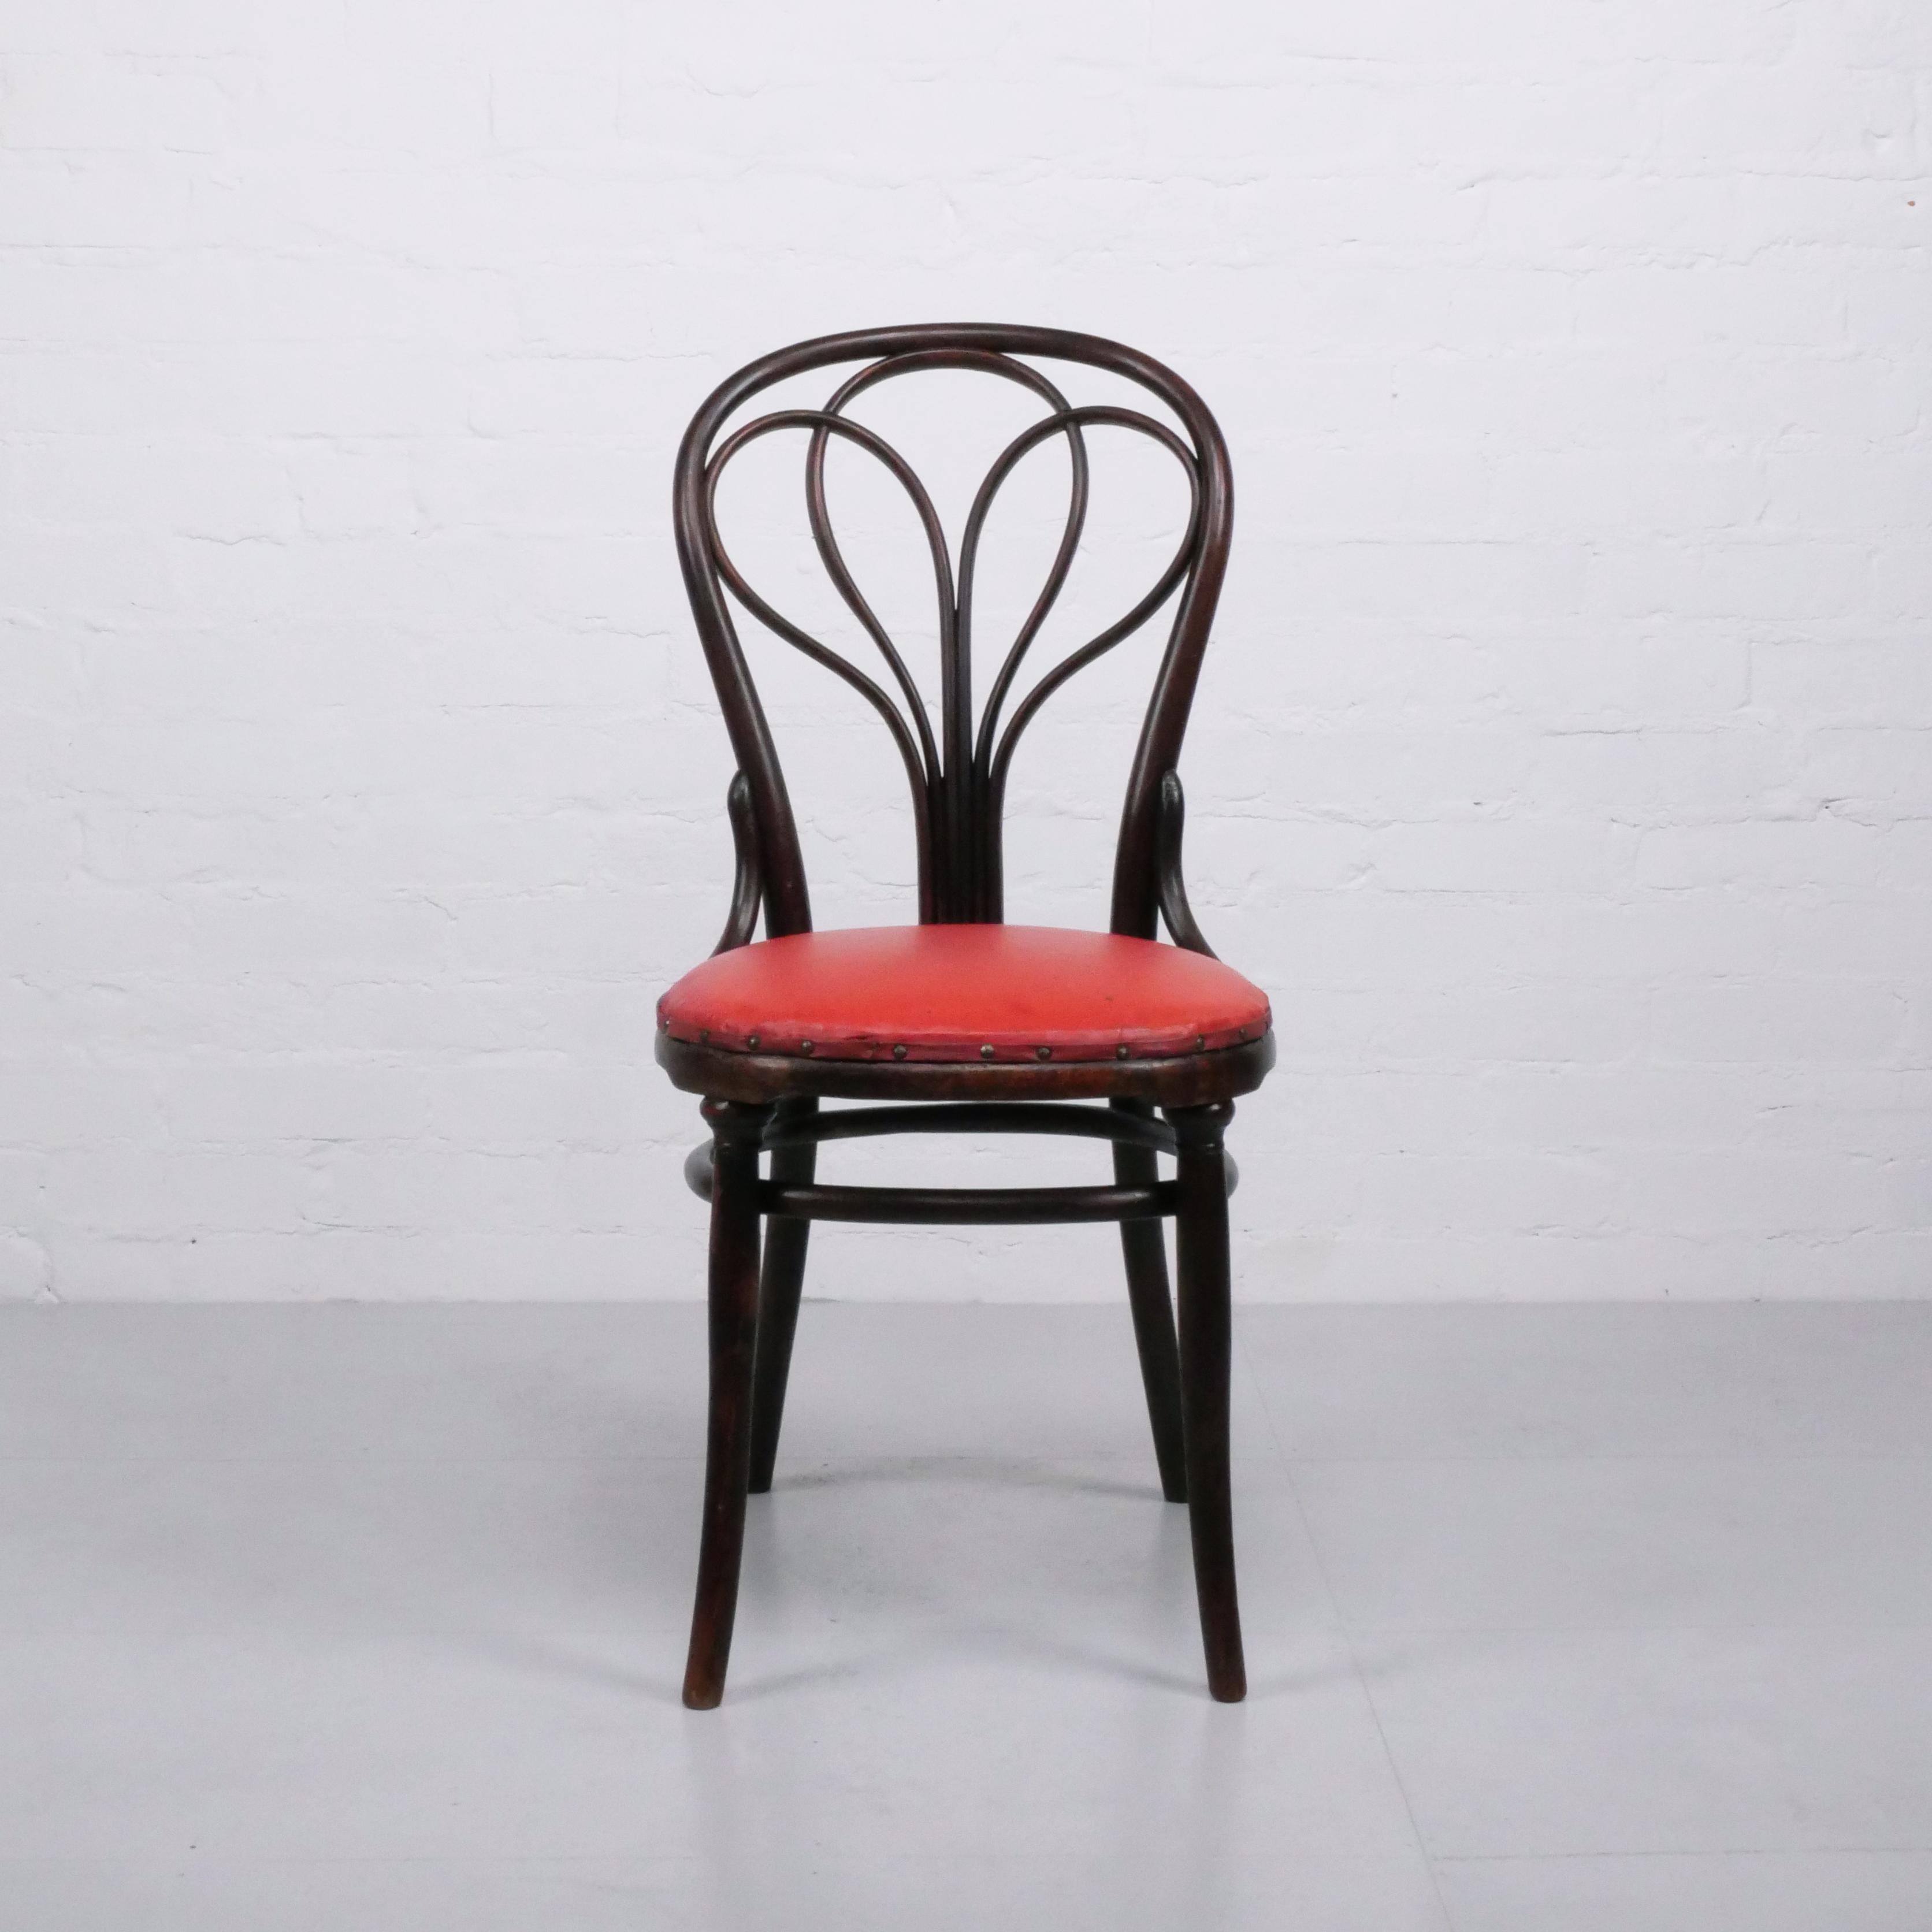 Austrian Set of 4 no.25 dining chairs by Gebrüder Thonet, c. 1870 For Sale